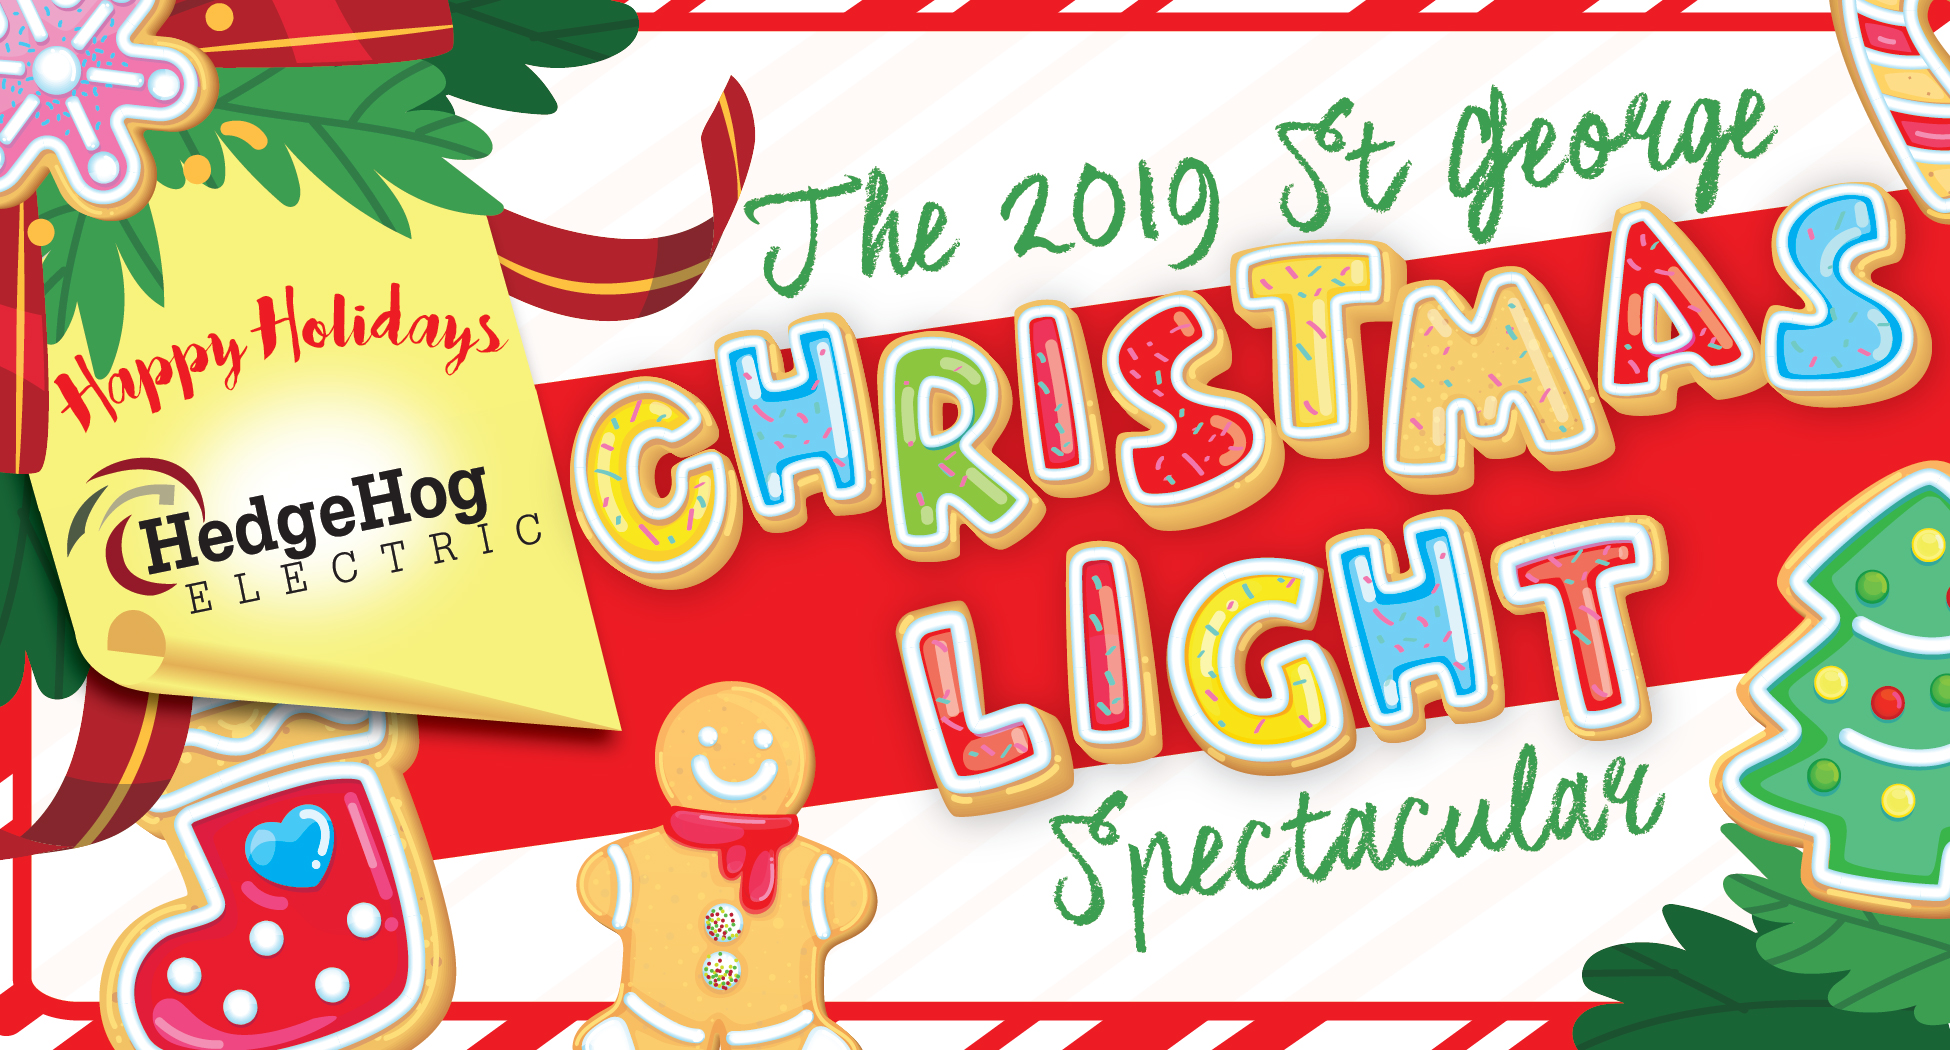 St. George Christmas Light Spectacular | Root for Kids